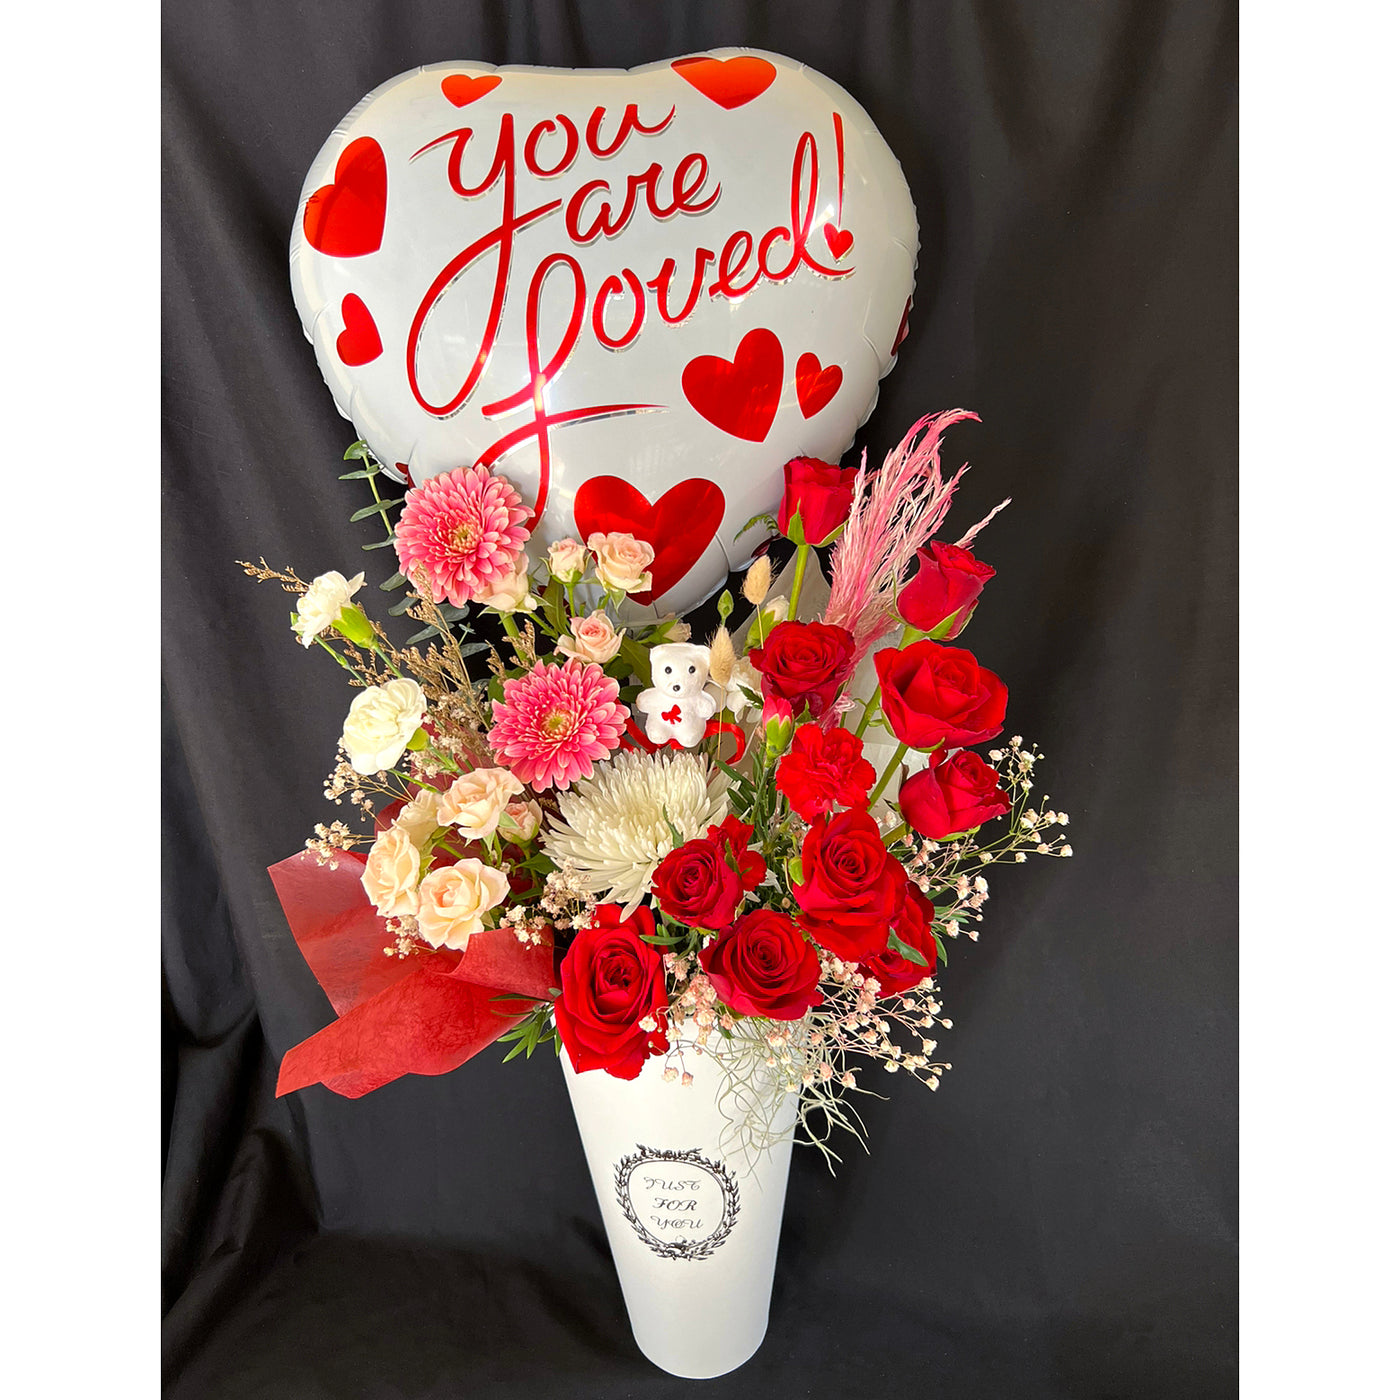 Mixed Flowers & Chocolates Box with Teddy/Balloon